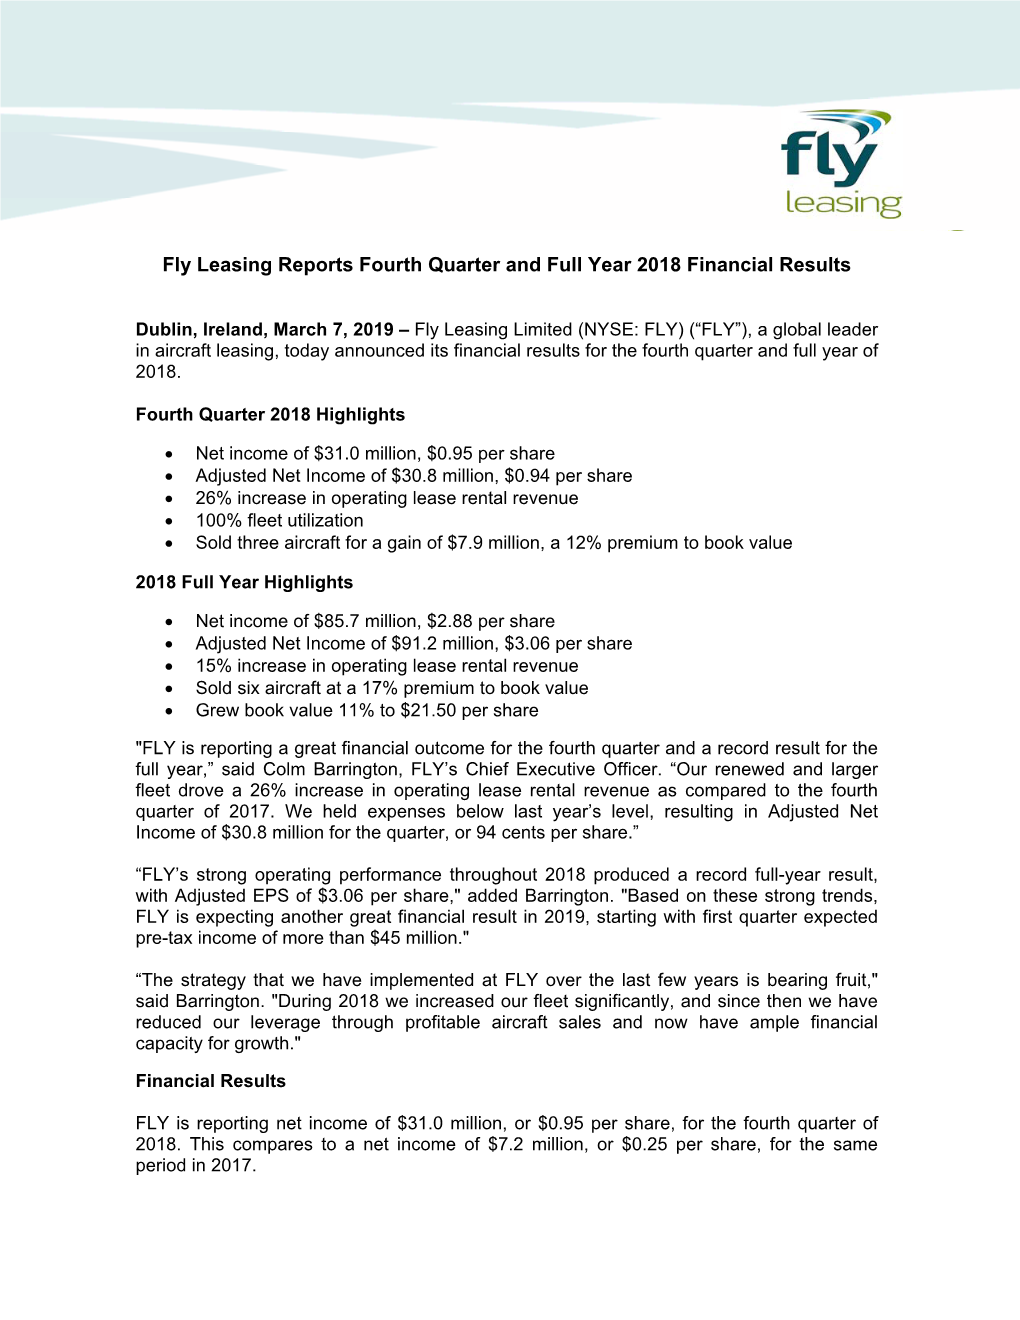 Fly Leasing Reports Fourth Quarter and Full Year 2018 Financial Results